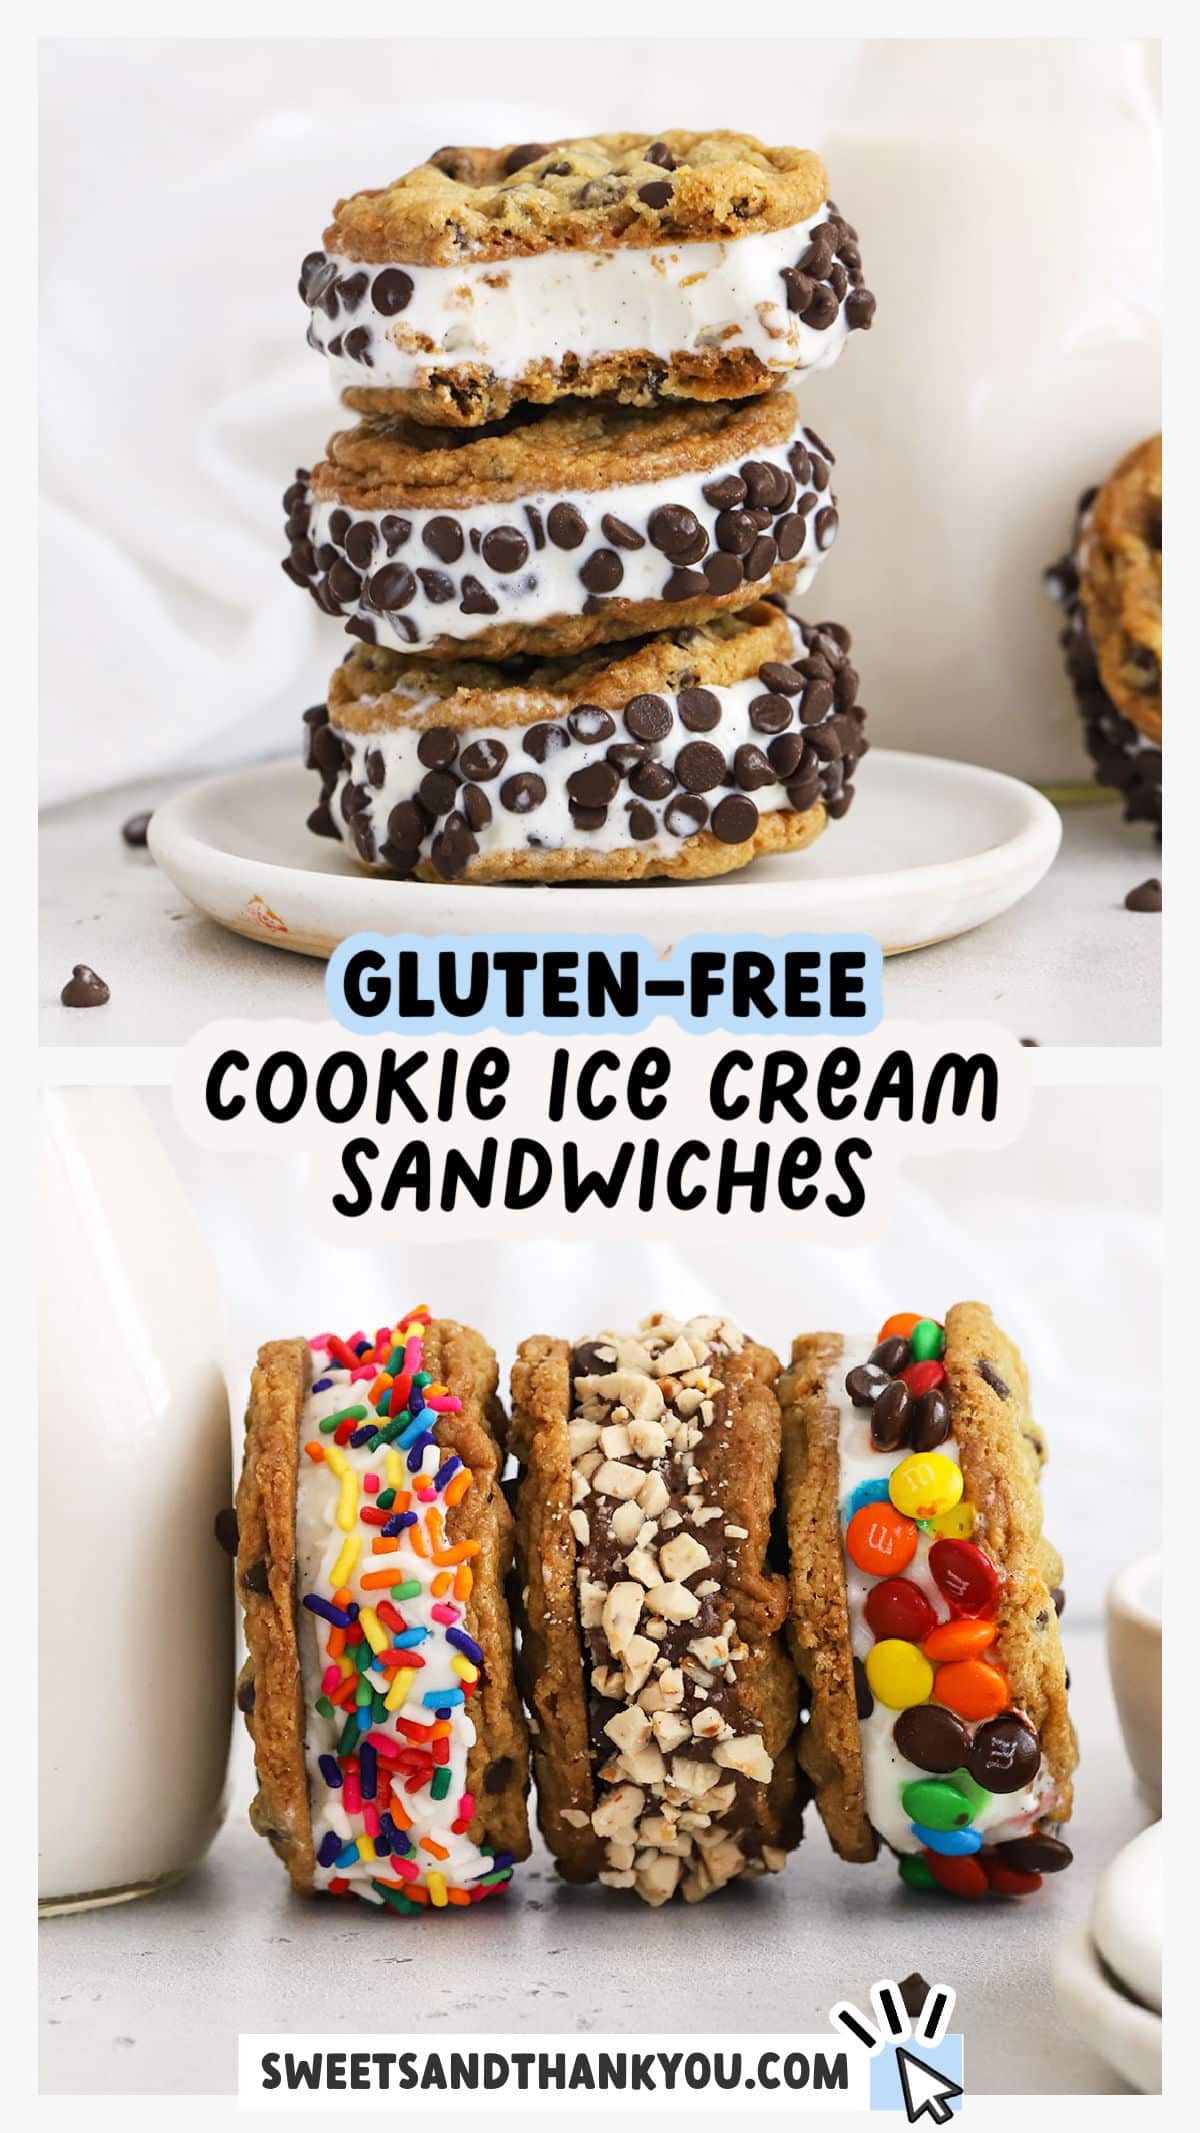 These gluten-free cookie ice cream sandwiches are such a fun summer dessert to cool off with. They're basically a homemade gluten-free chipwich! Made with thin, crisp chocolate chip cookies and creamy vanilla ice cream. Try our classic combination or mix & match ice creams and toppings to create your own! No matter how you make them, this ice cream treat is always a hit with the whole family! 